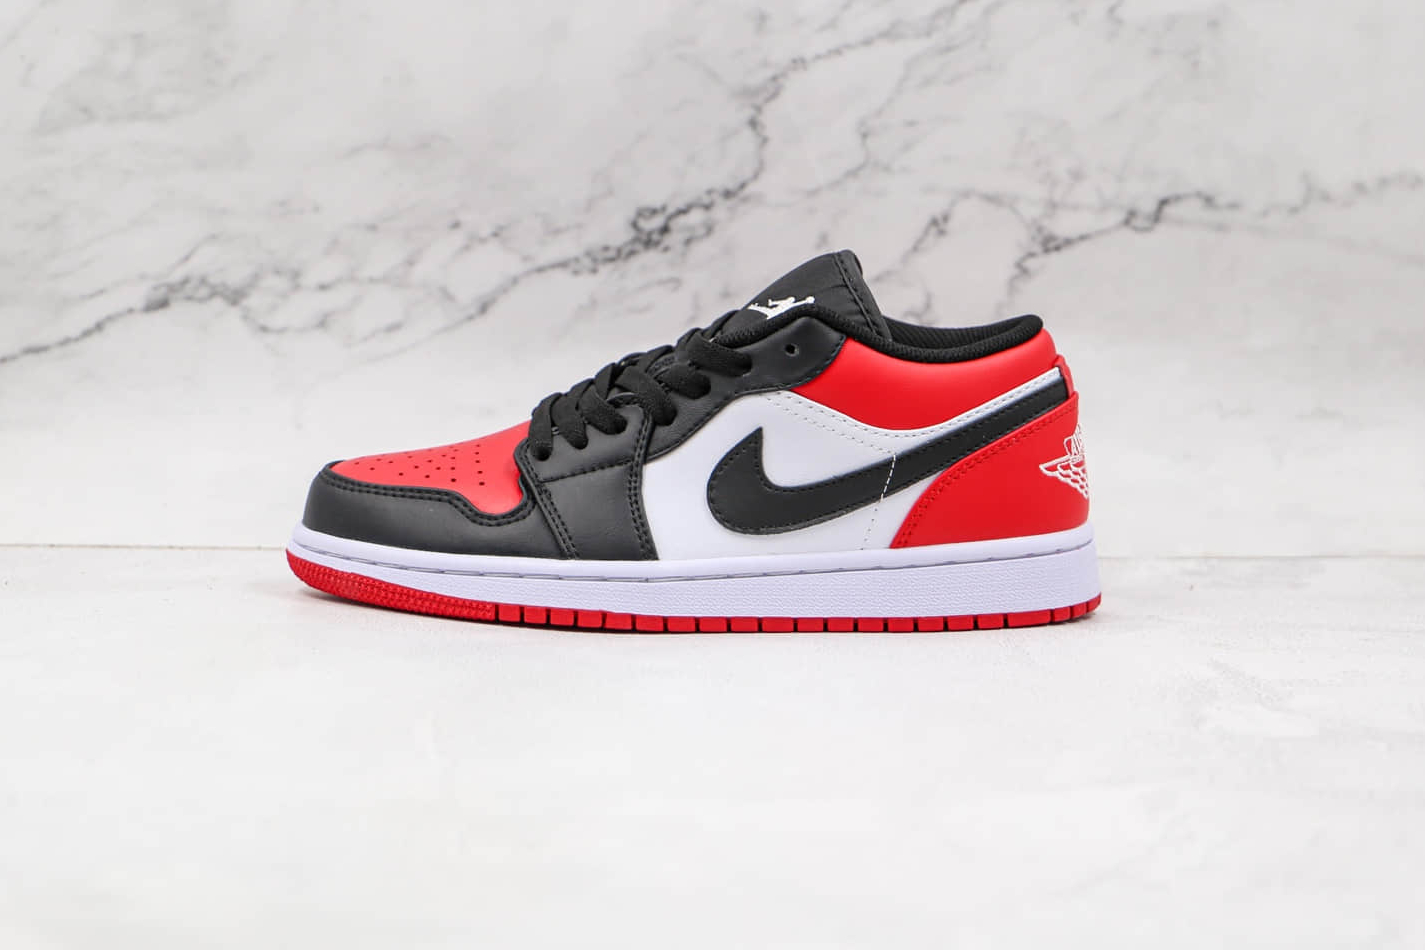 Air Jordan 1 Low 'Bred Toe' 553558-612: Classic Style and Quality Craftsmanship for Sneaker Enthusiasts